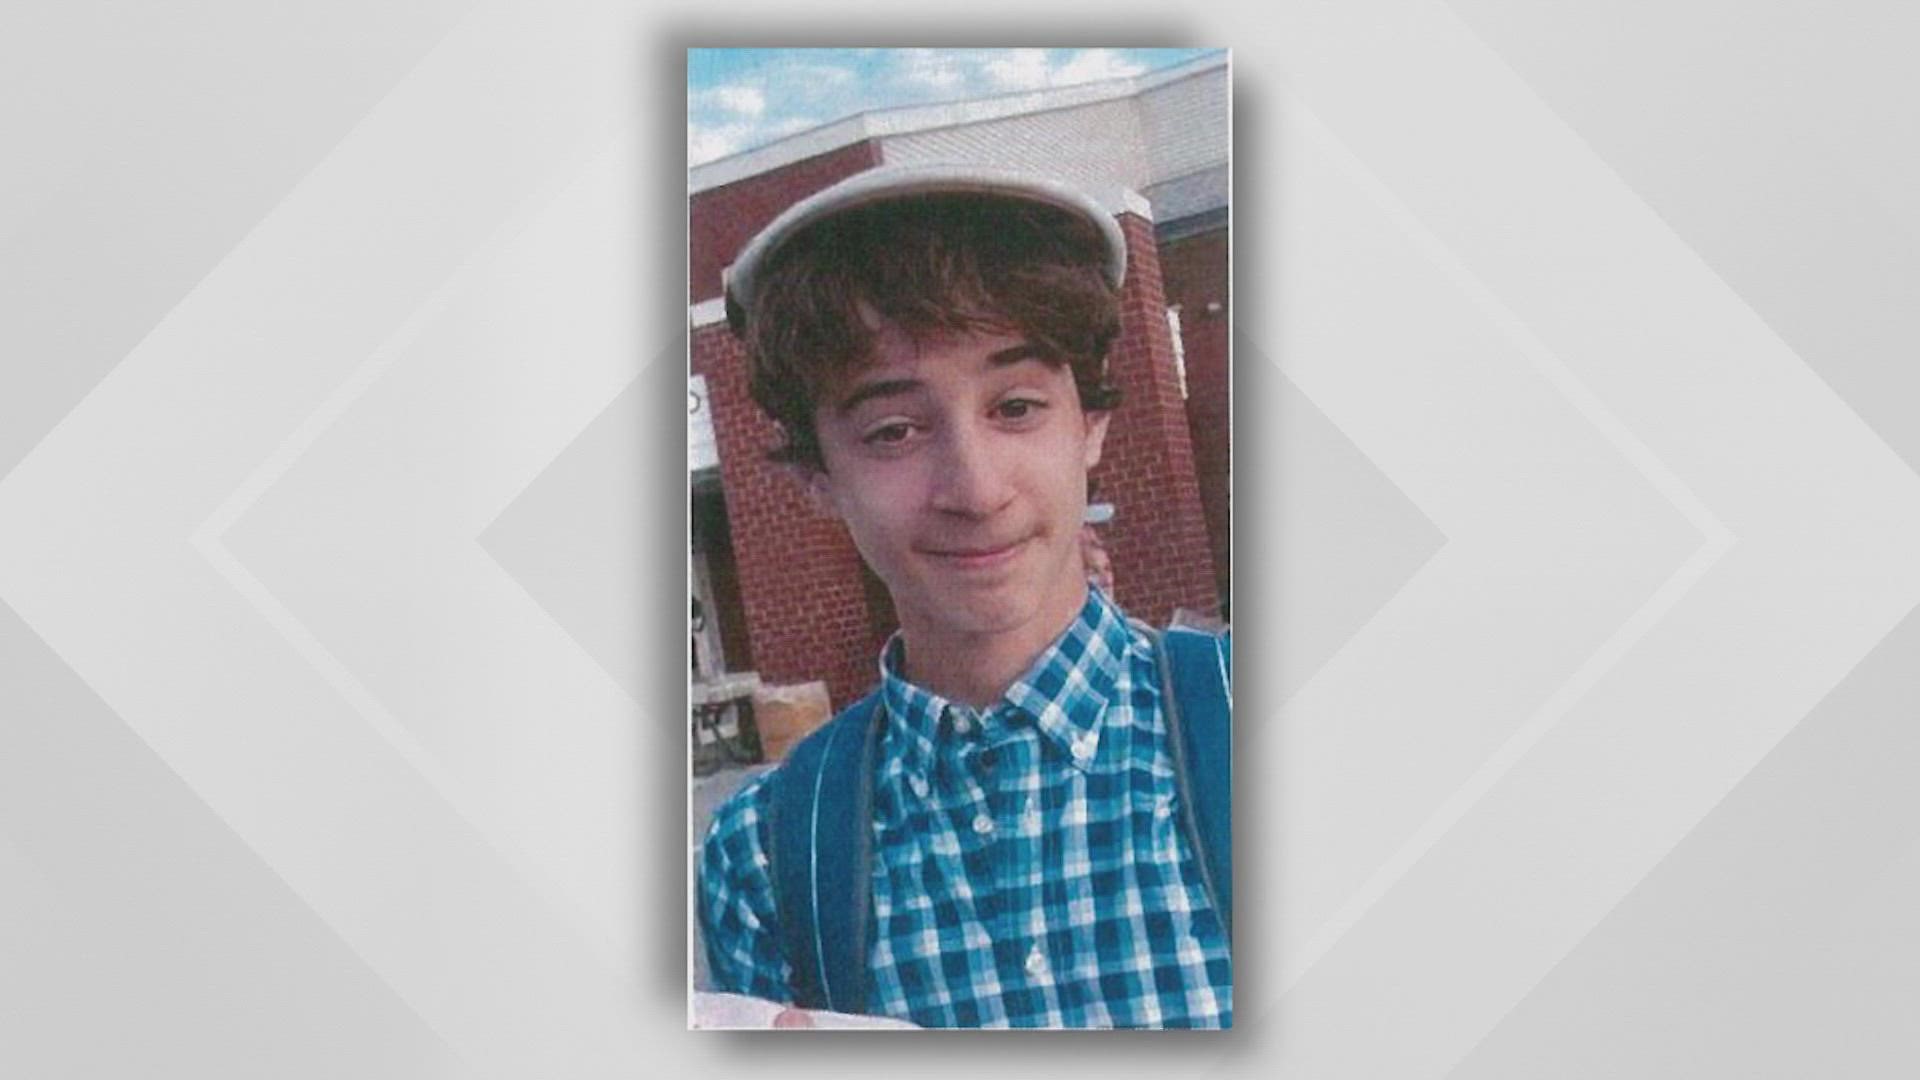 Theo Ferrara was last seen around 4:30 p.m. Thursday. Police say he does not have any history of running away from home.